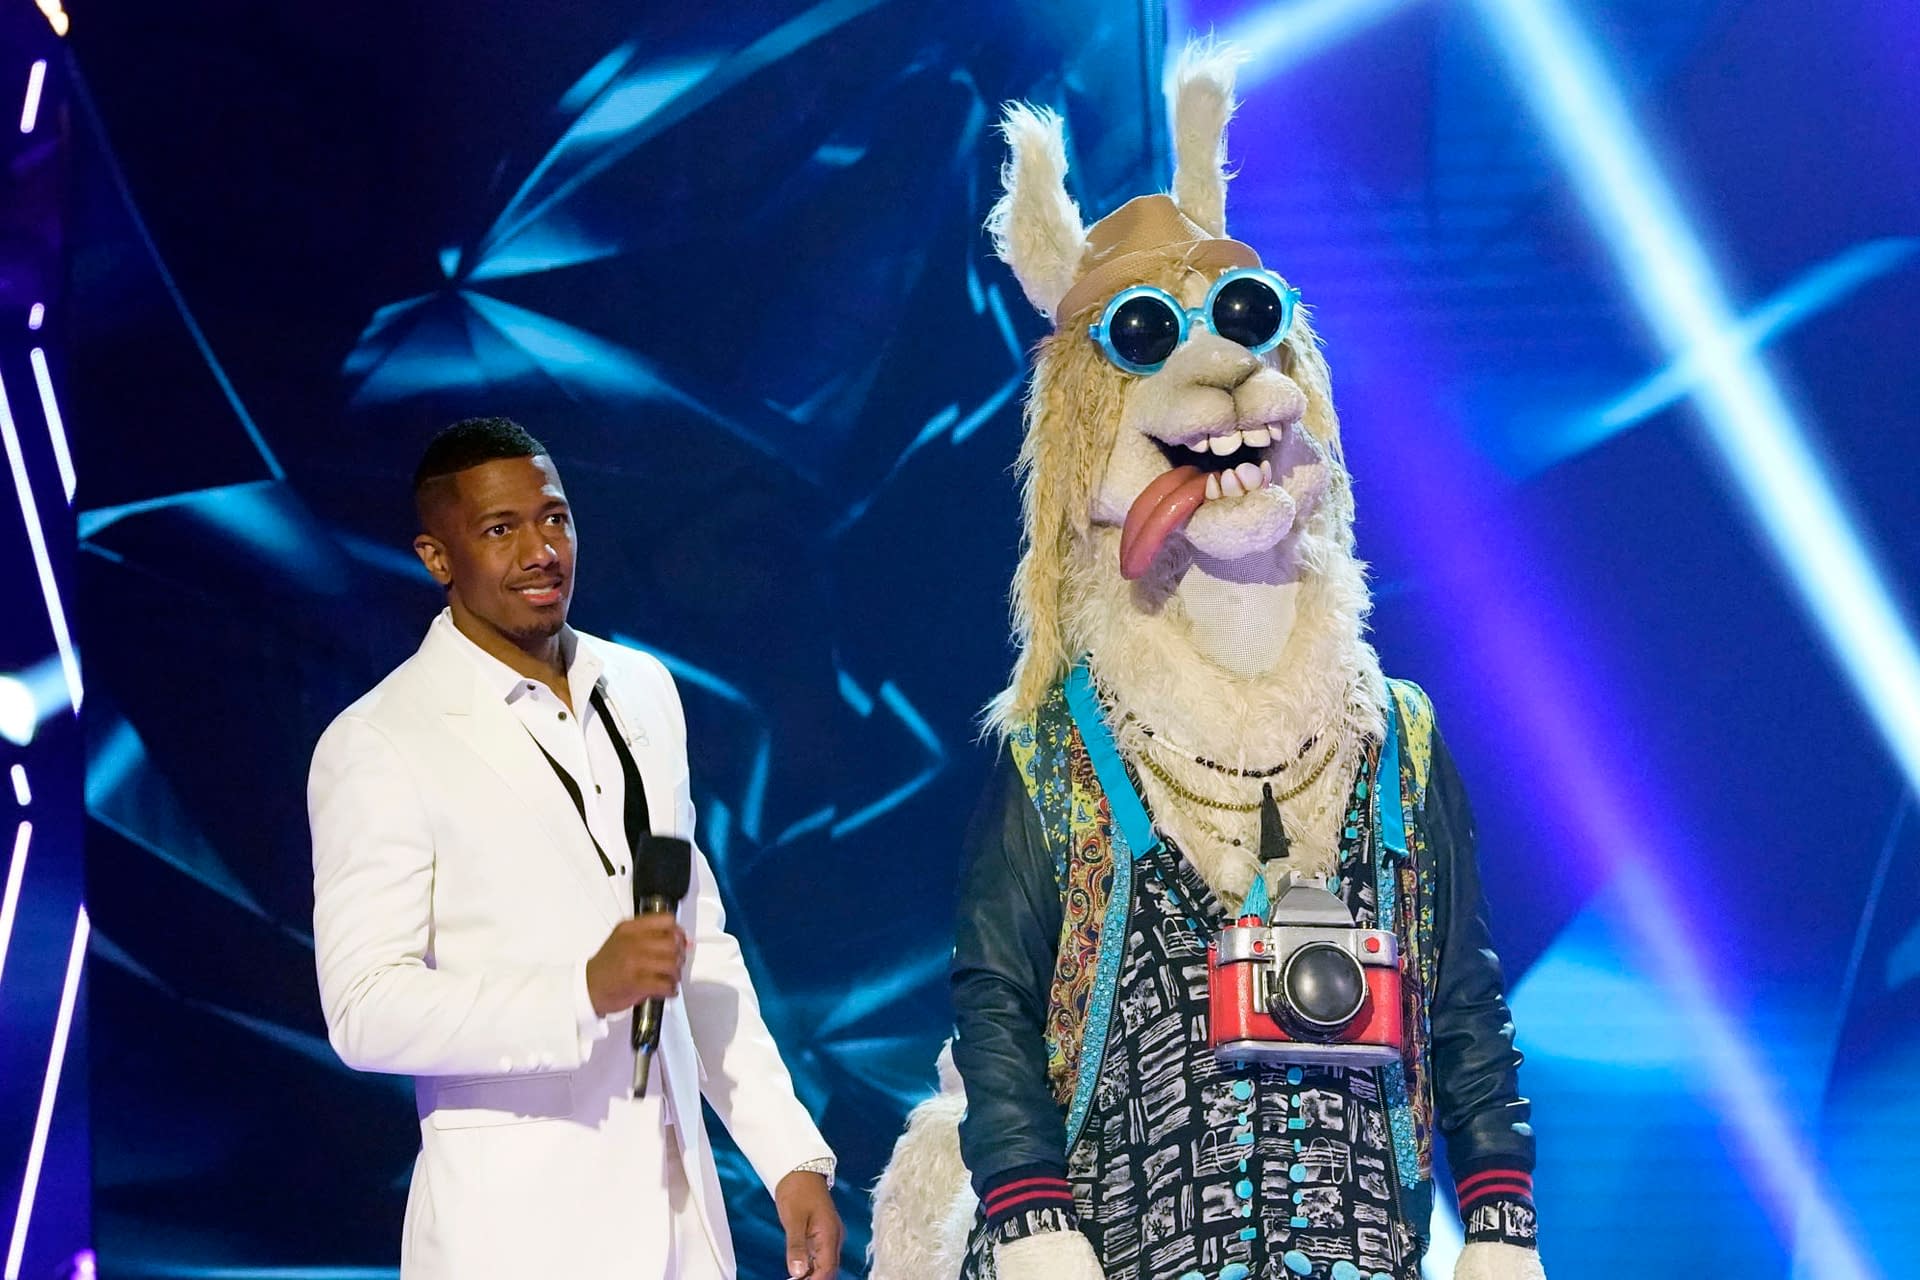 "The Masked Singer" Season 3: Our Masks Are Ready for Their Post-Super Bowl "Time To Shine" [PREVIEW]